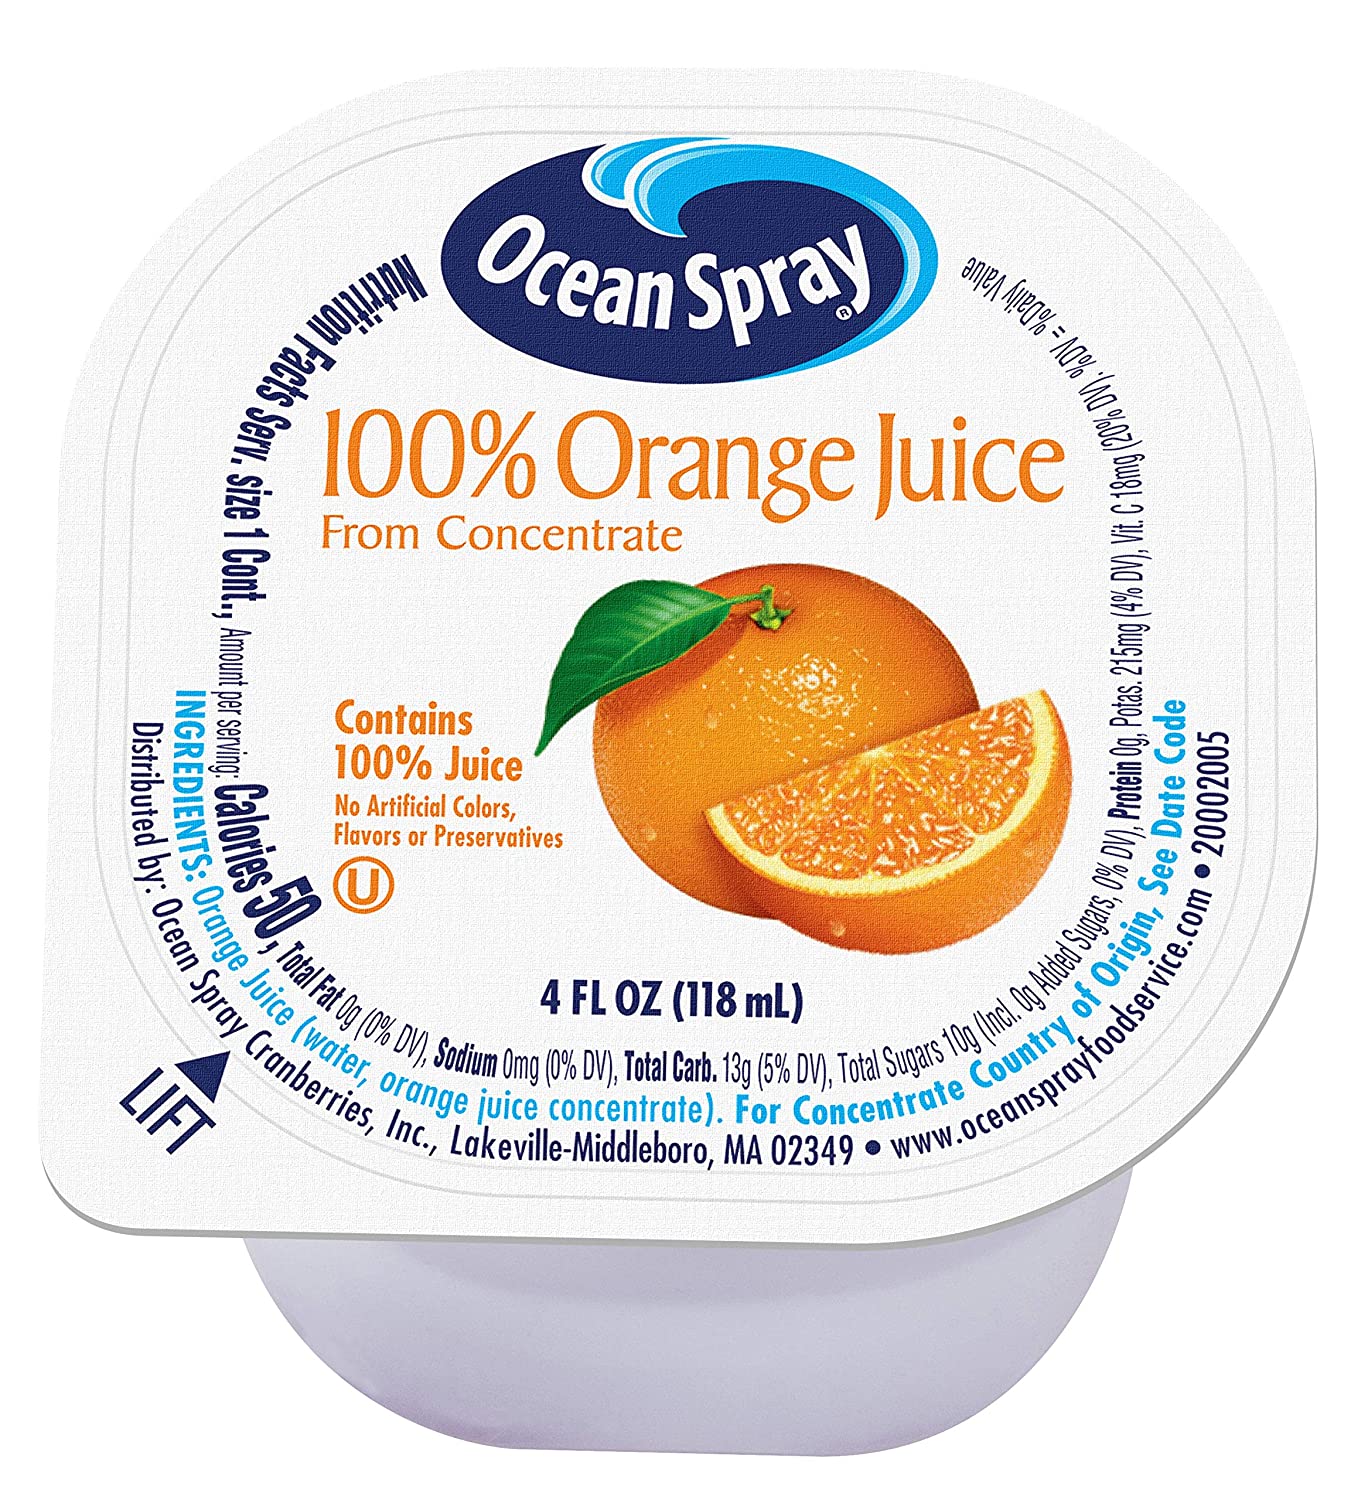 48-Pack 4-Oz Ocean Spray 100% Orange Juice Cups $15.78 w/ S&S + Free Shipping w/ Prime or on $25+